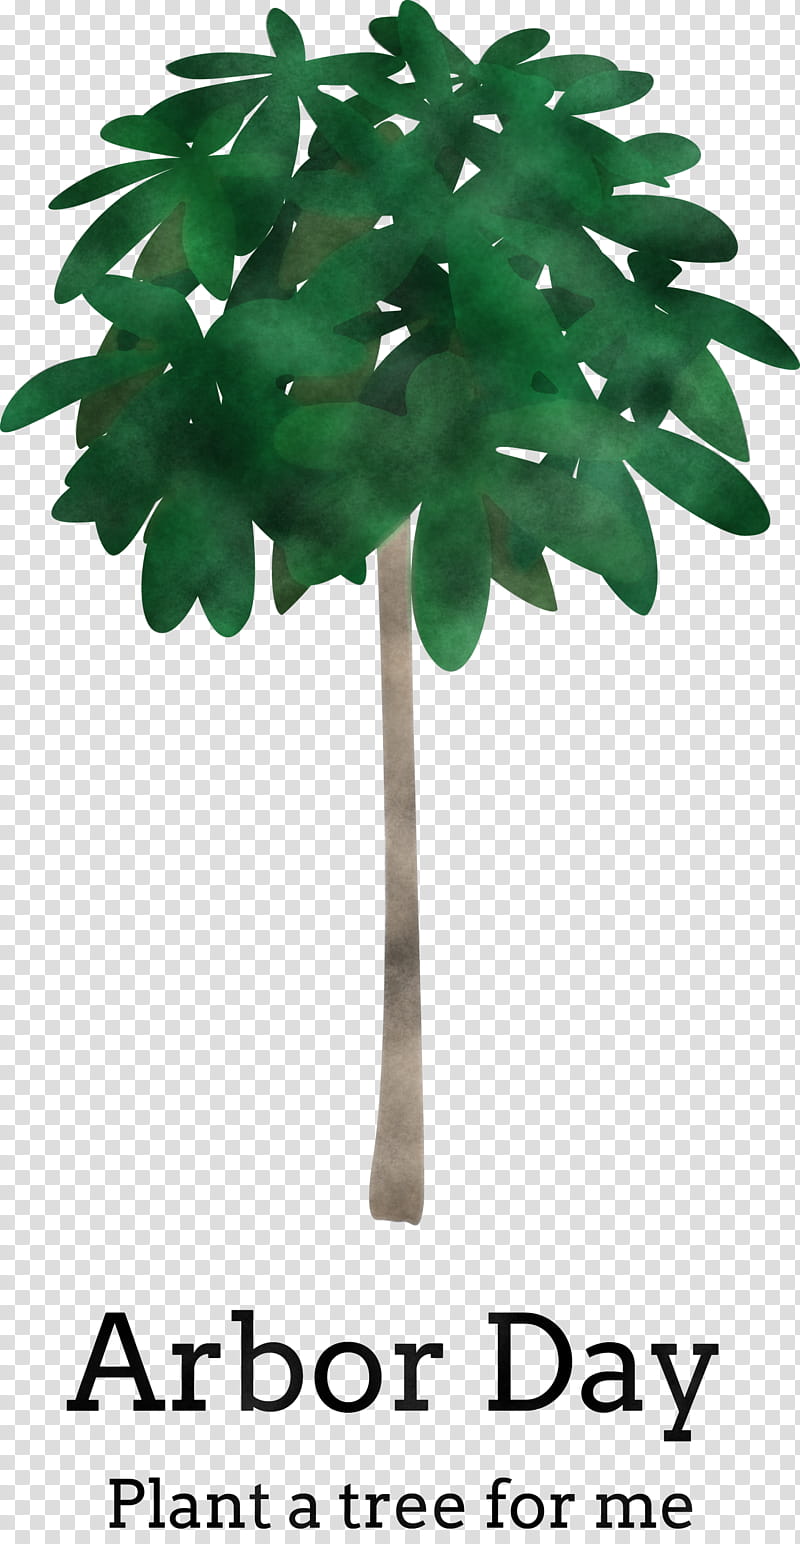 Arbor Day Green Earth Earth Day, Tree, Plant, Leaf, Monstera Deliciosa, Flower, Woody Plant, Plant Stem transparent background PNG clipart